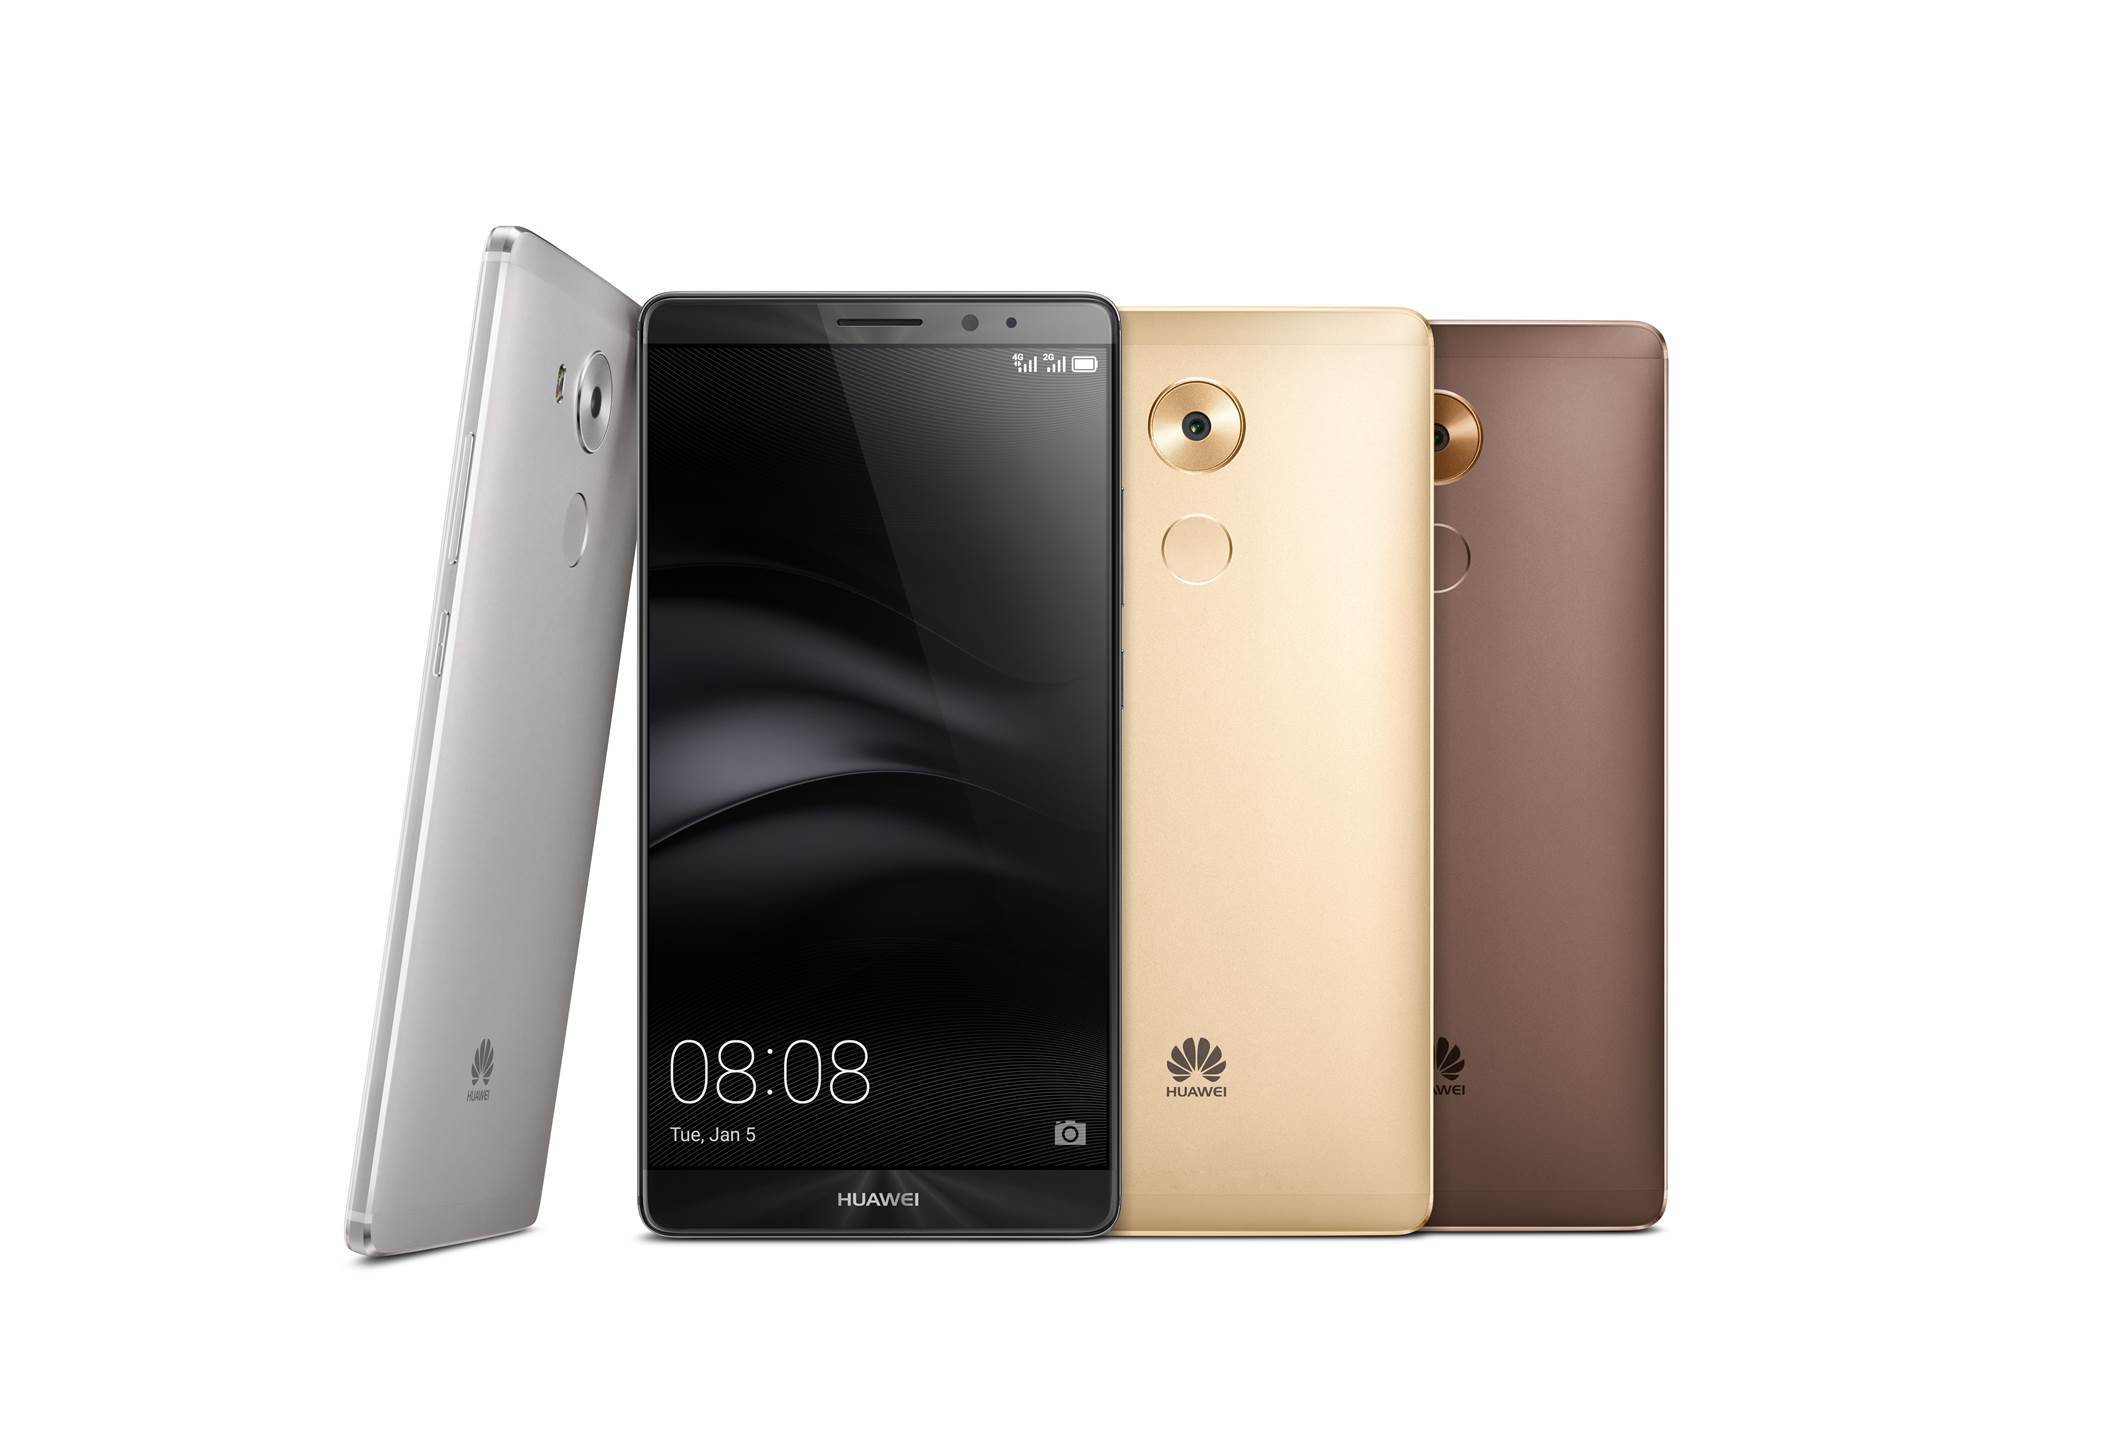 dorst Lastig Benadrukken Huawei Globally Launches the Mate 8 Smartphone at CES 2016 | Business Wire